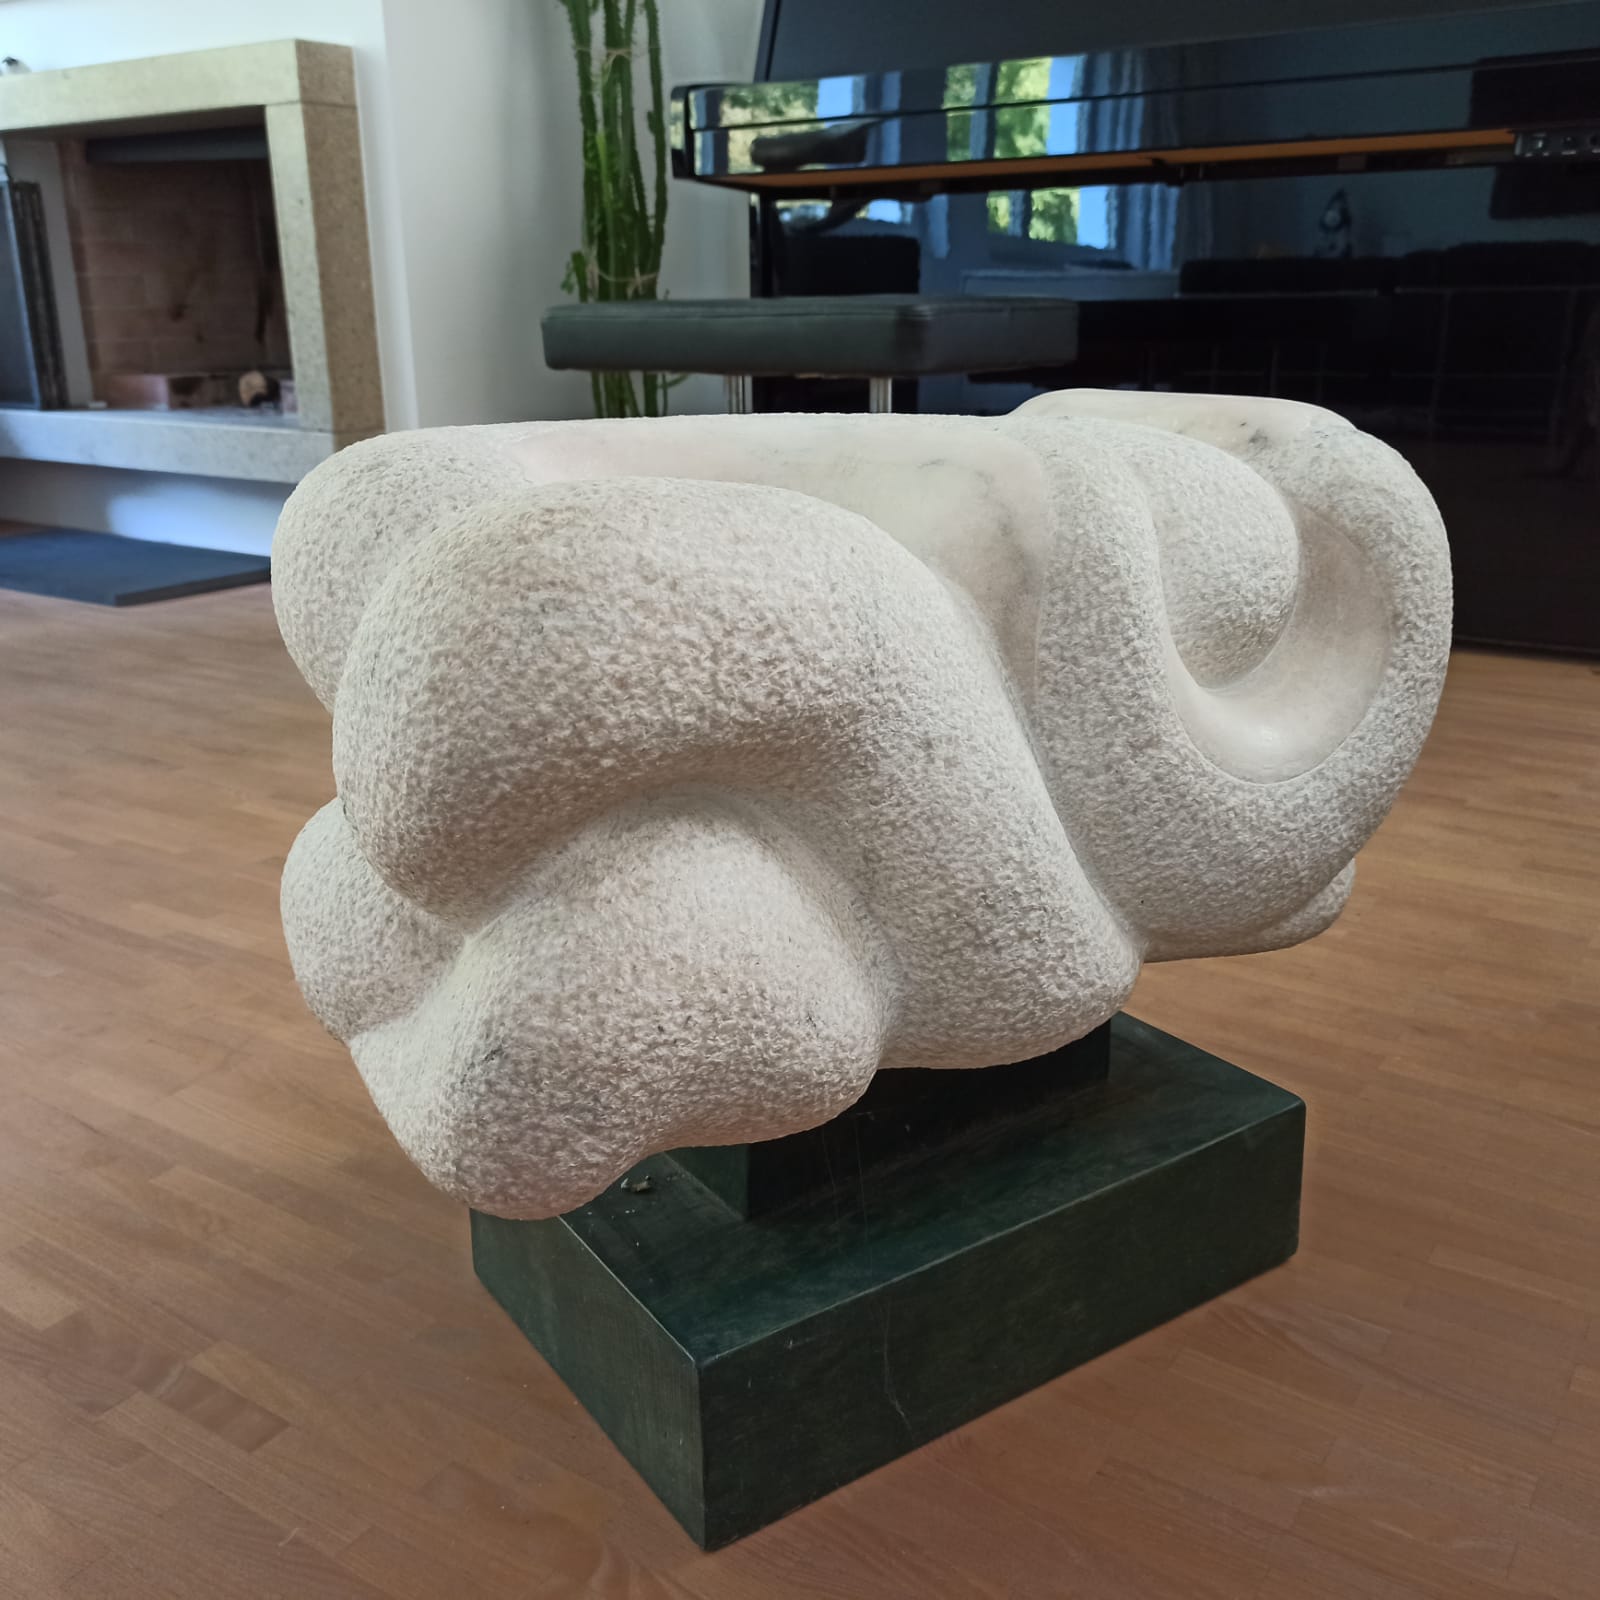 M. Piotrowski, Snake/ Schlange (marble, H 28), 1975. owned by the family. Winterthur, Switzerland